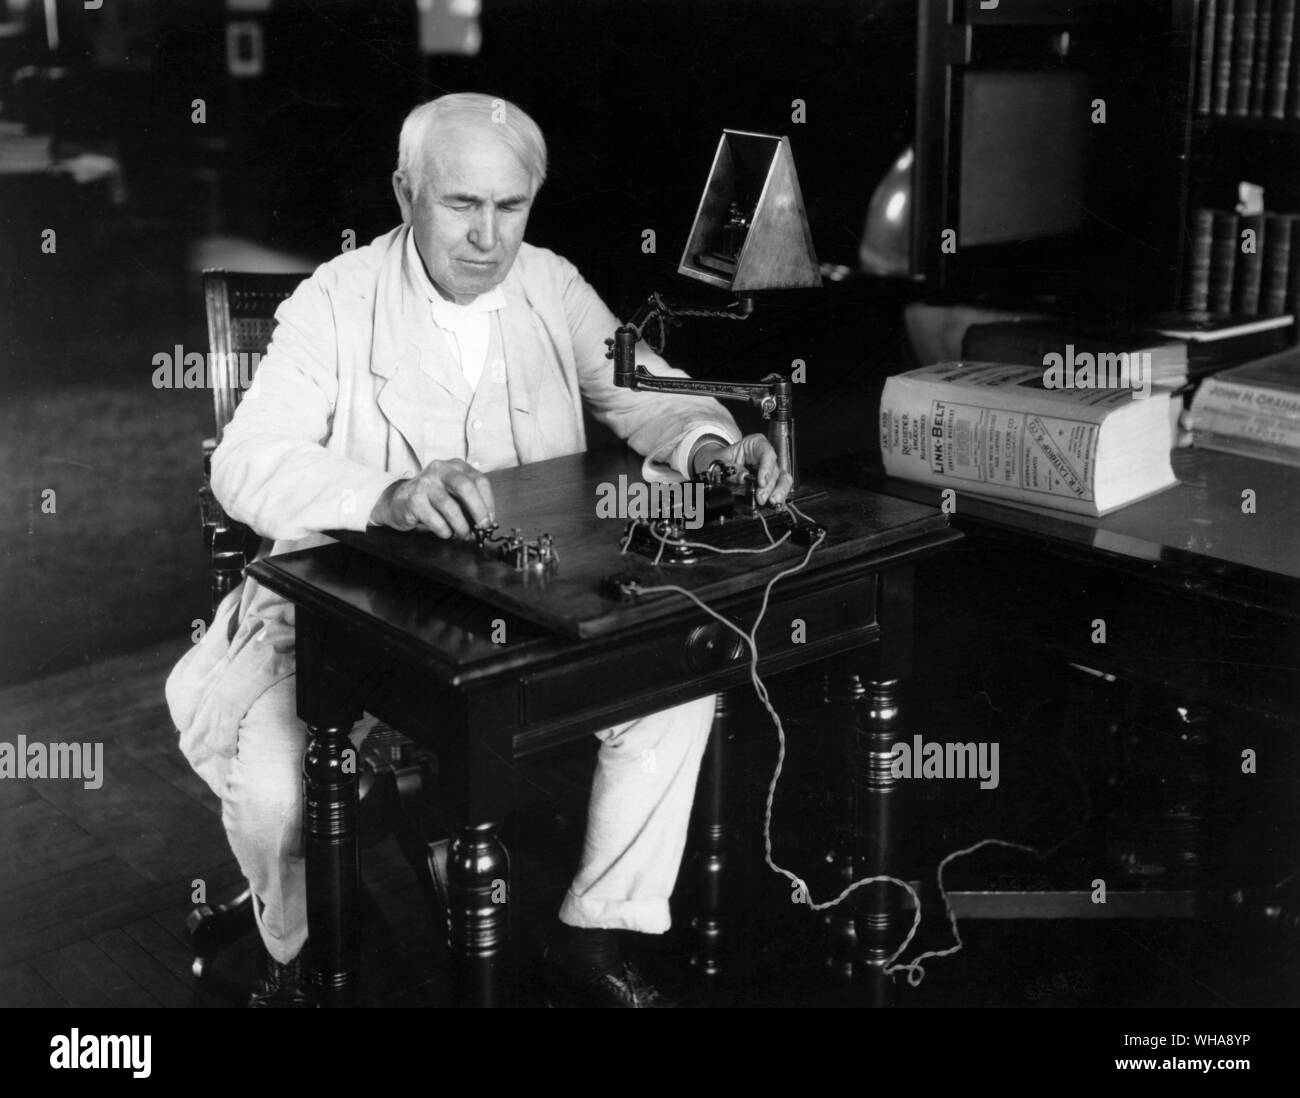 Edison seated at Telegraph key 1920. 28th July 1920. Edison National Historic Site Orange New Jersey. . Edison, Thomas Alva (the Wizard of Menlo Park) US inventor; opened research laboratory in Menlo Park, New Jersey 1876 (moved to West Orange, New Jersey 1887); invented phonograph (1st demonstrated 1877); invented incandescent electric light 1879; invented kinetograph camera and kinetoscope motion-picture viewer (patented 1891)  1847-1931 . . Stock Photo